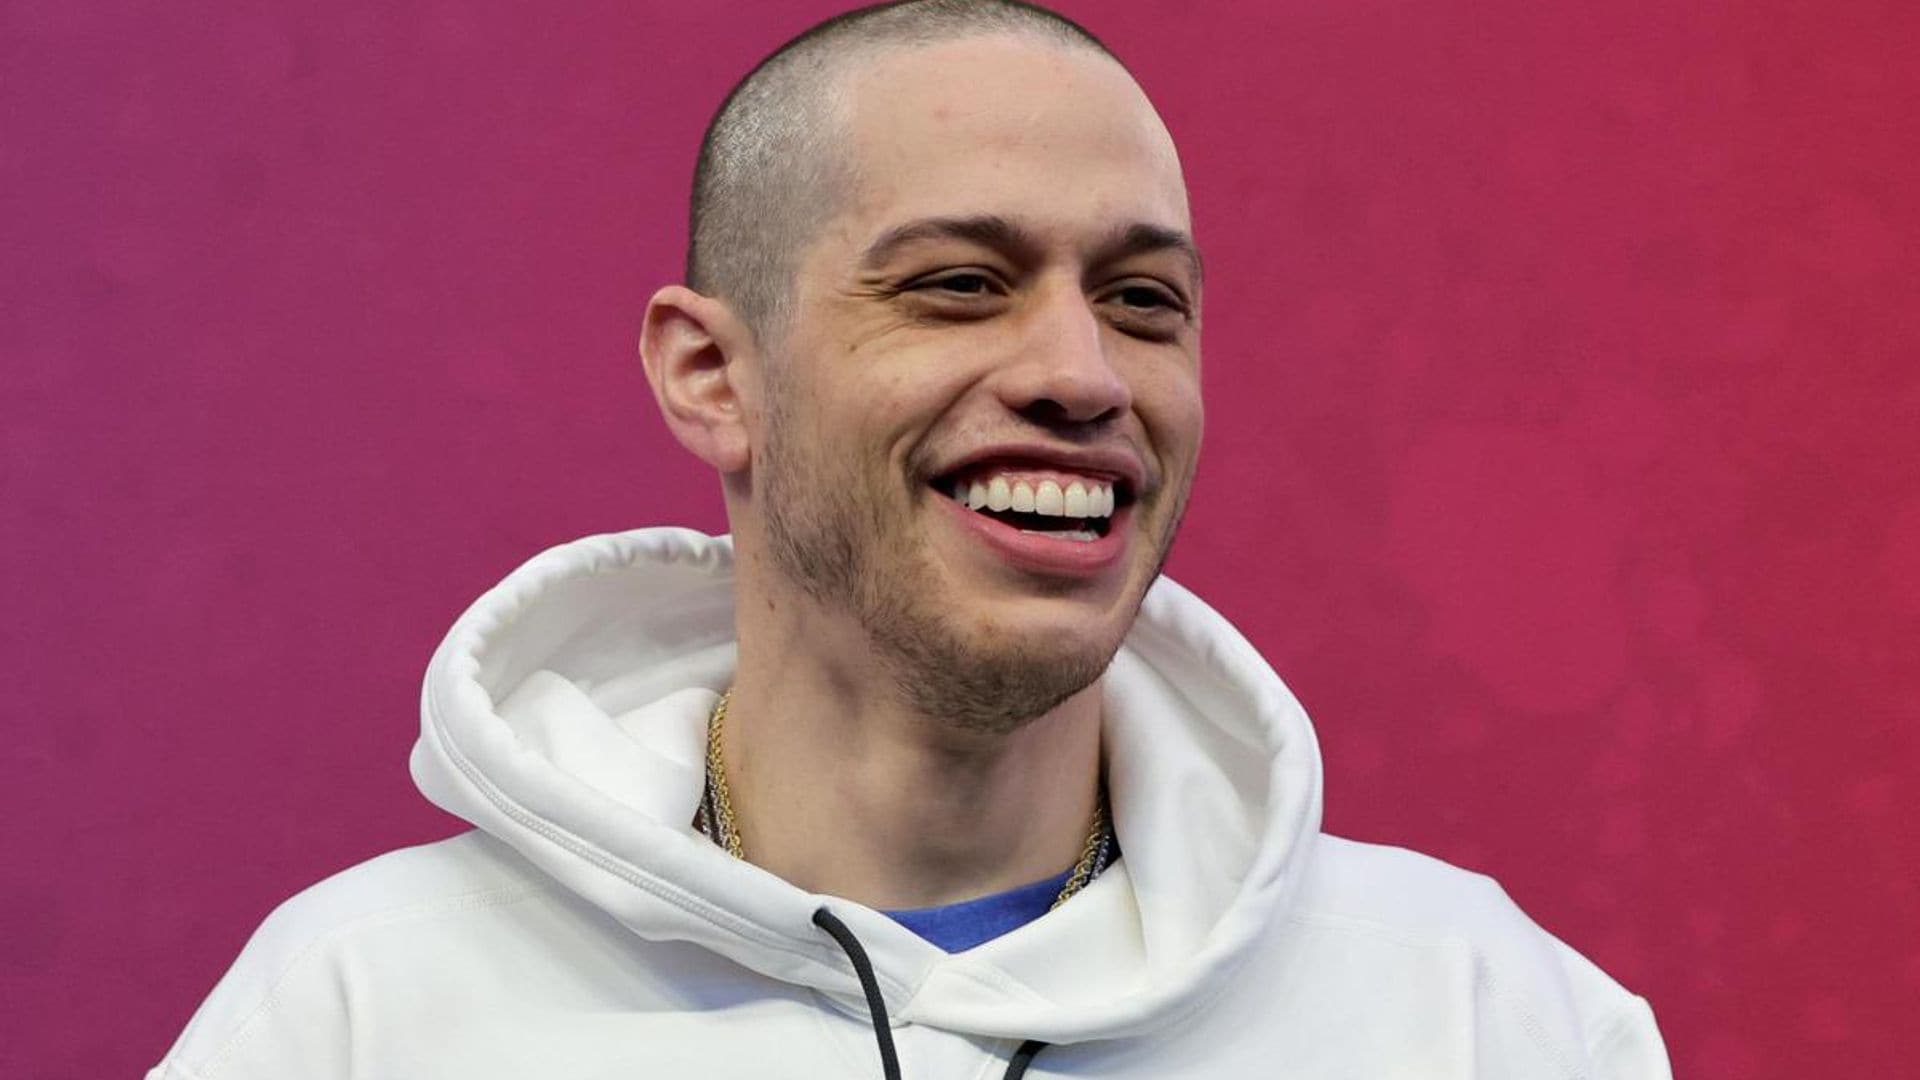 Pete Davidson opens up about therapy and his mental health journey